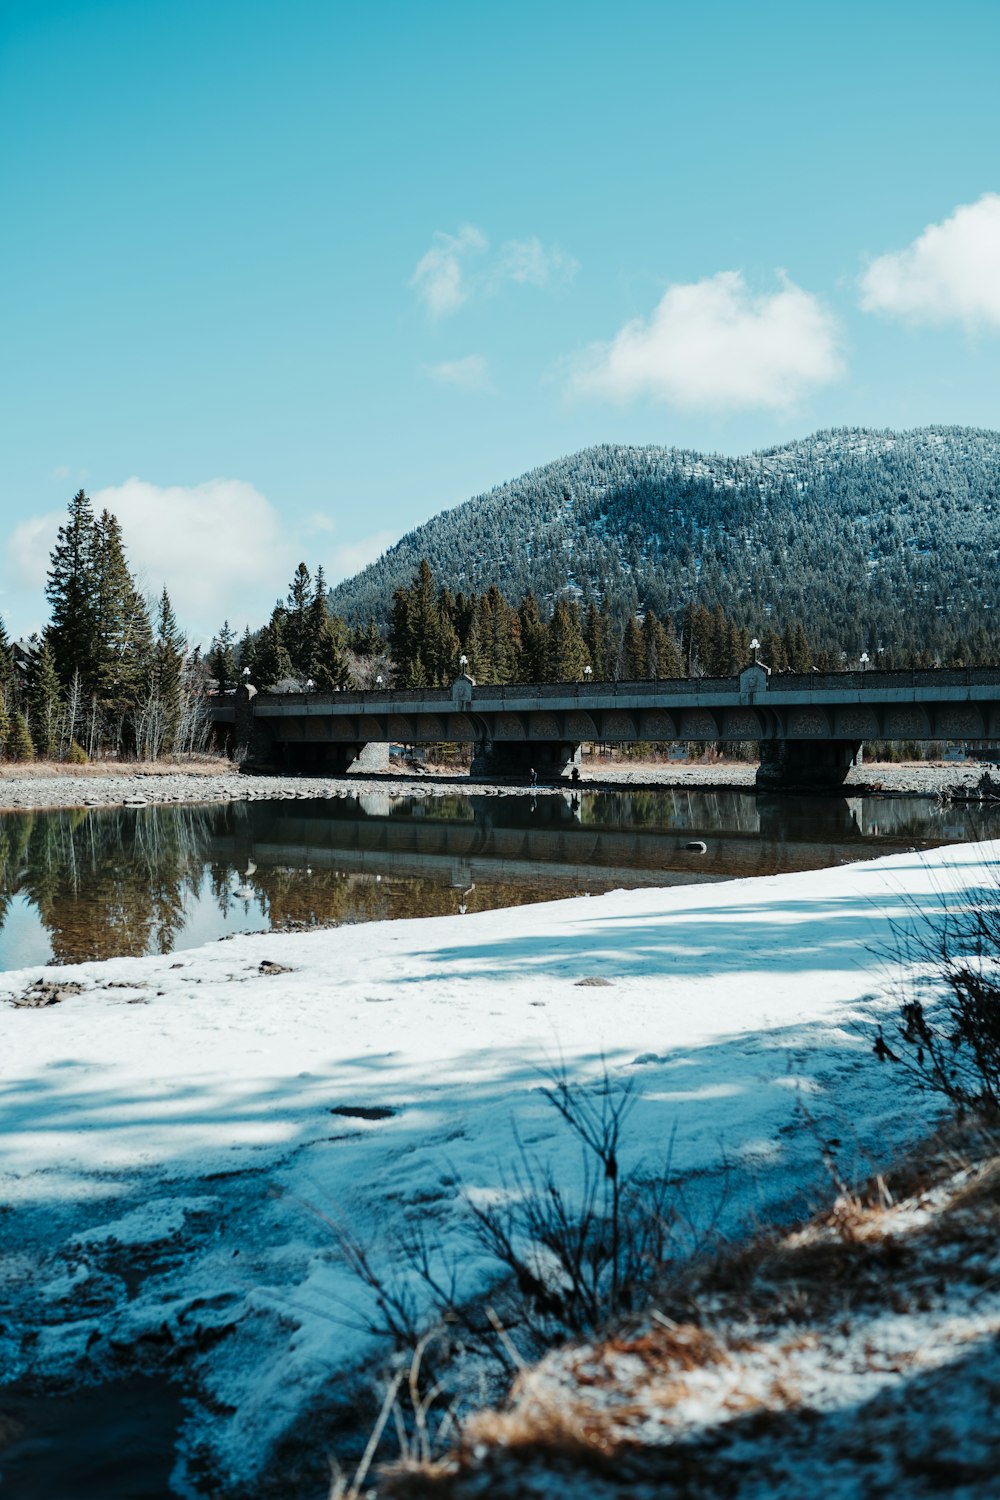 a bridge over a body of water with snow and trees in the background